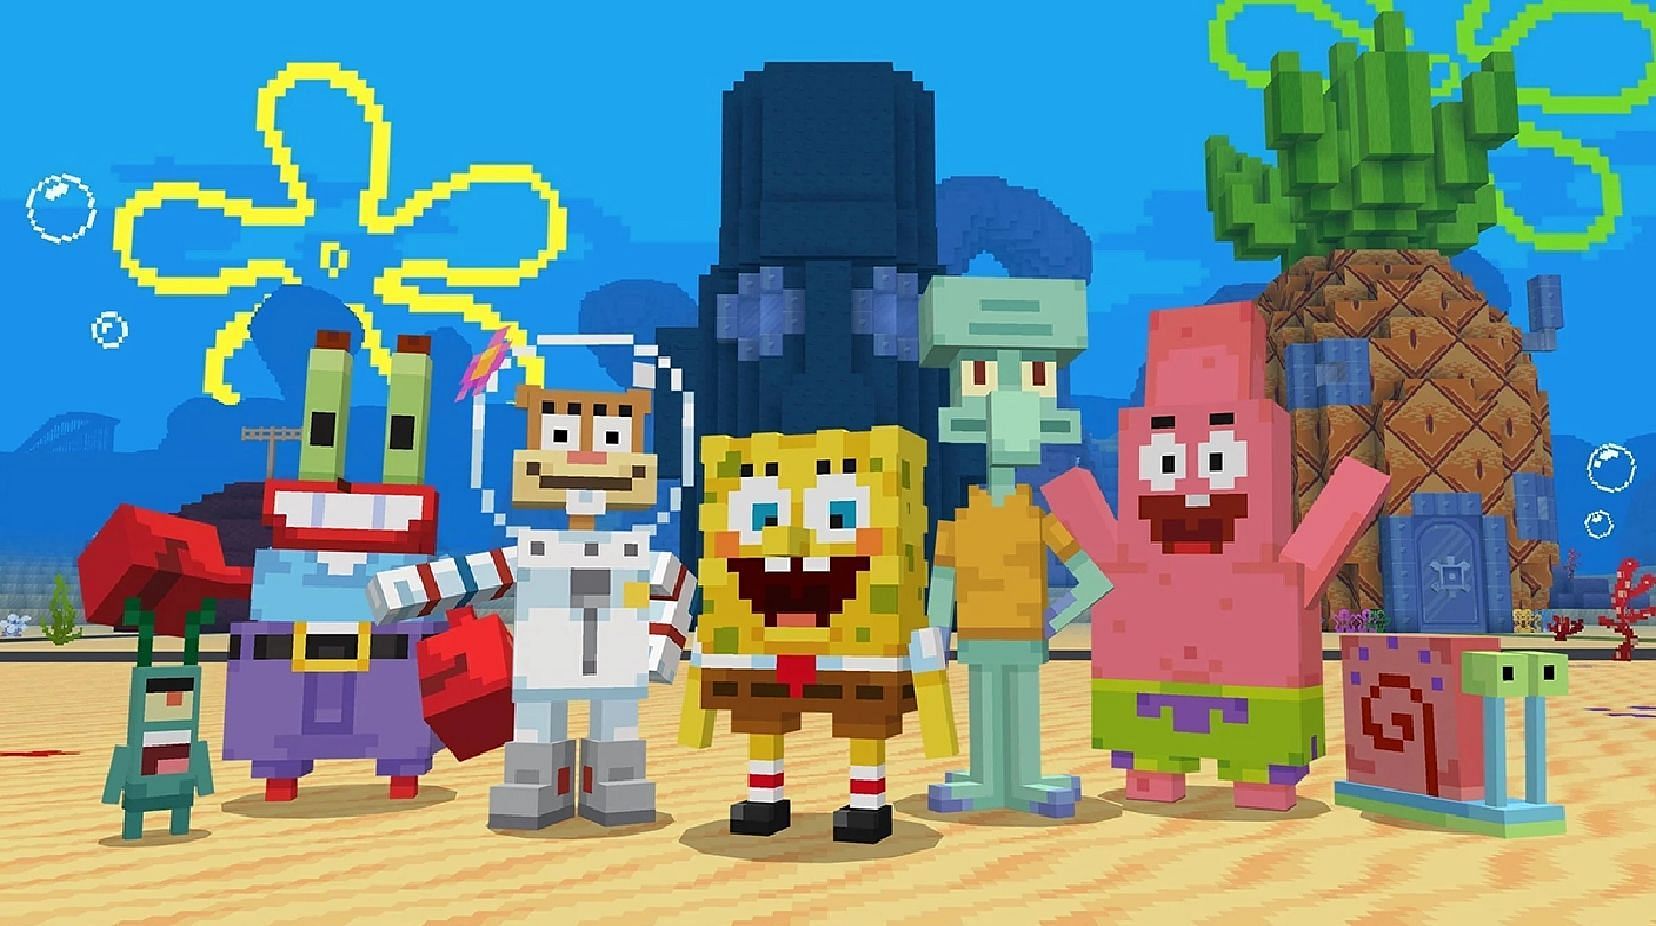 Some of the skins available in the DLC (Image via Minecraft)